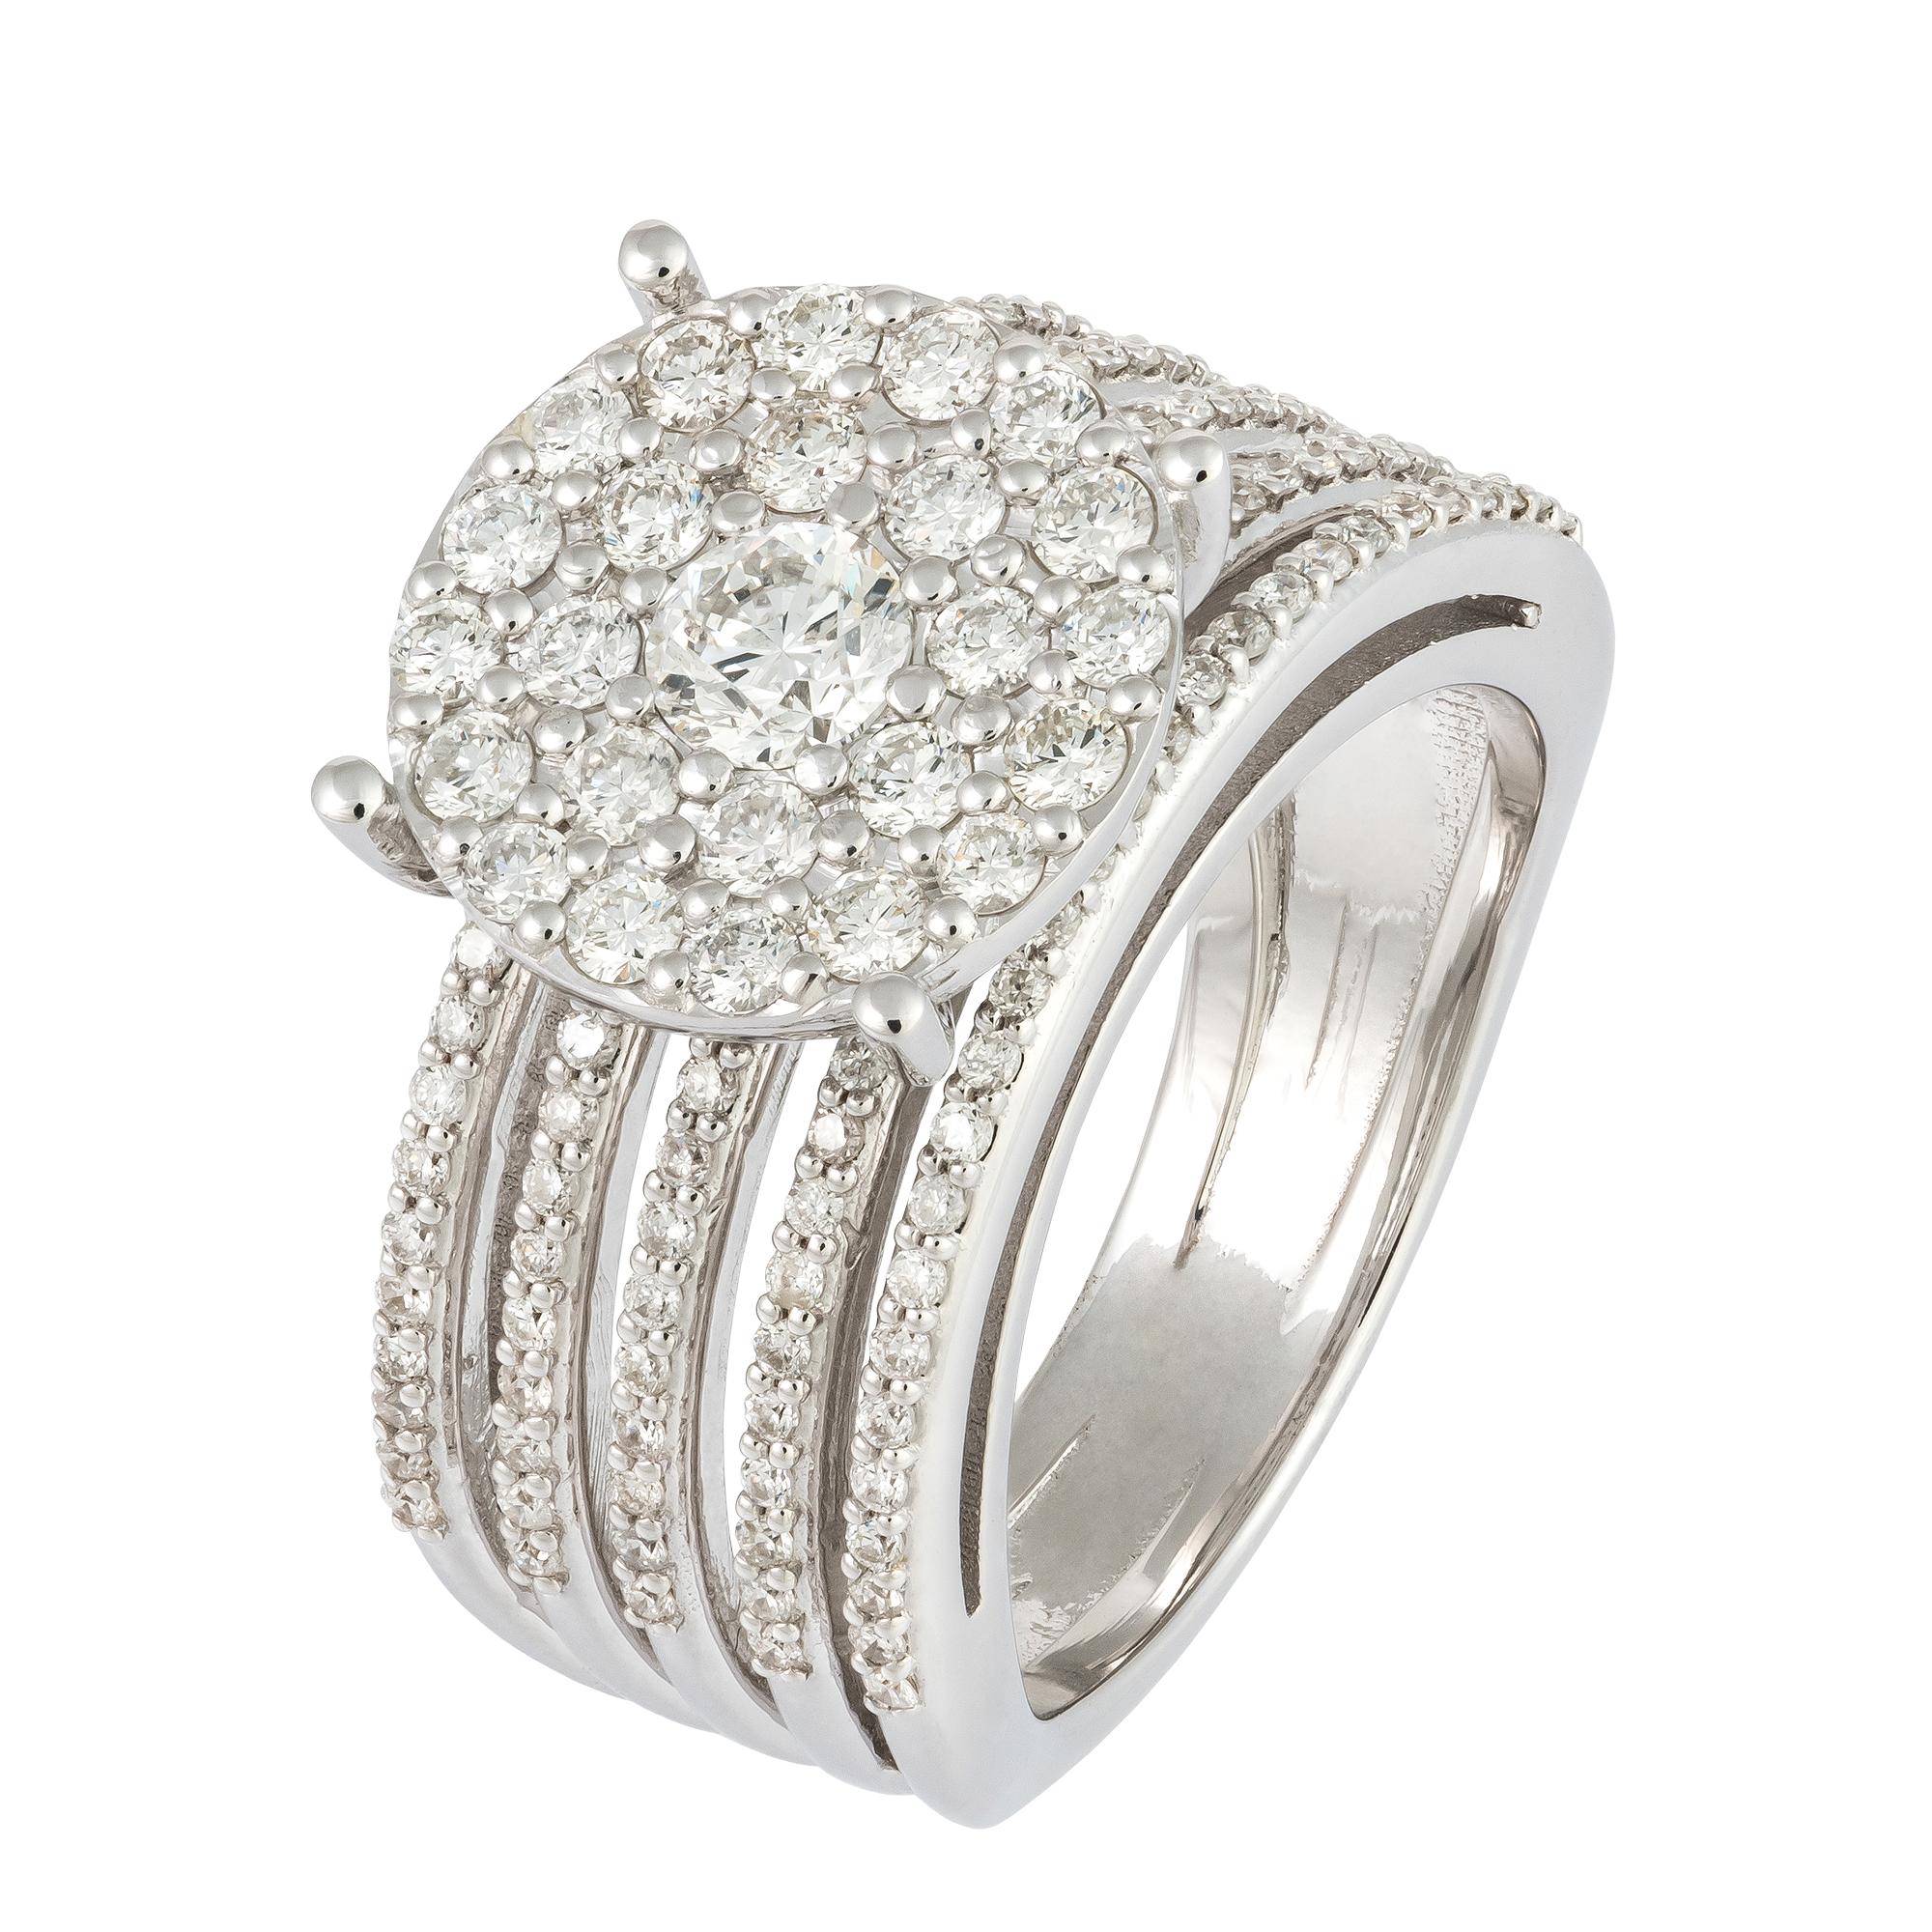 For Sale:  Statement White 18K Gold White Diamond Ring for Her 3